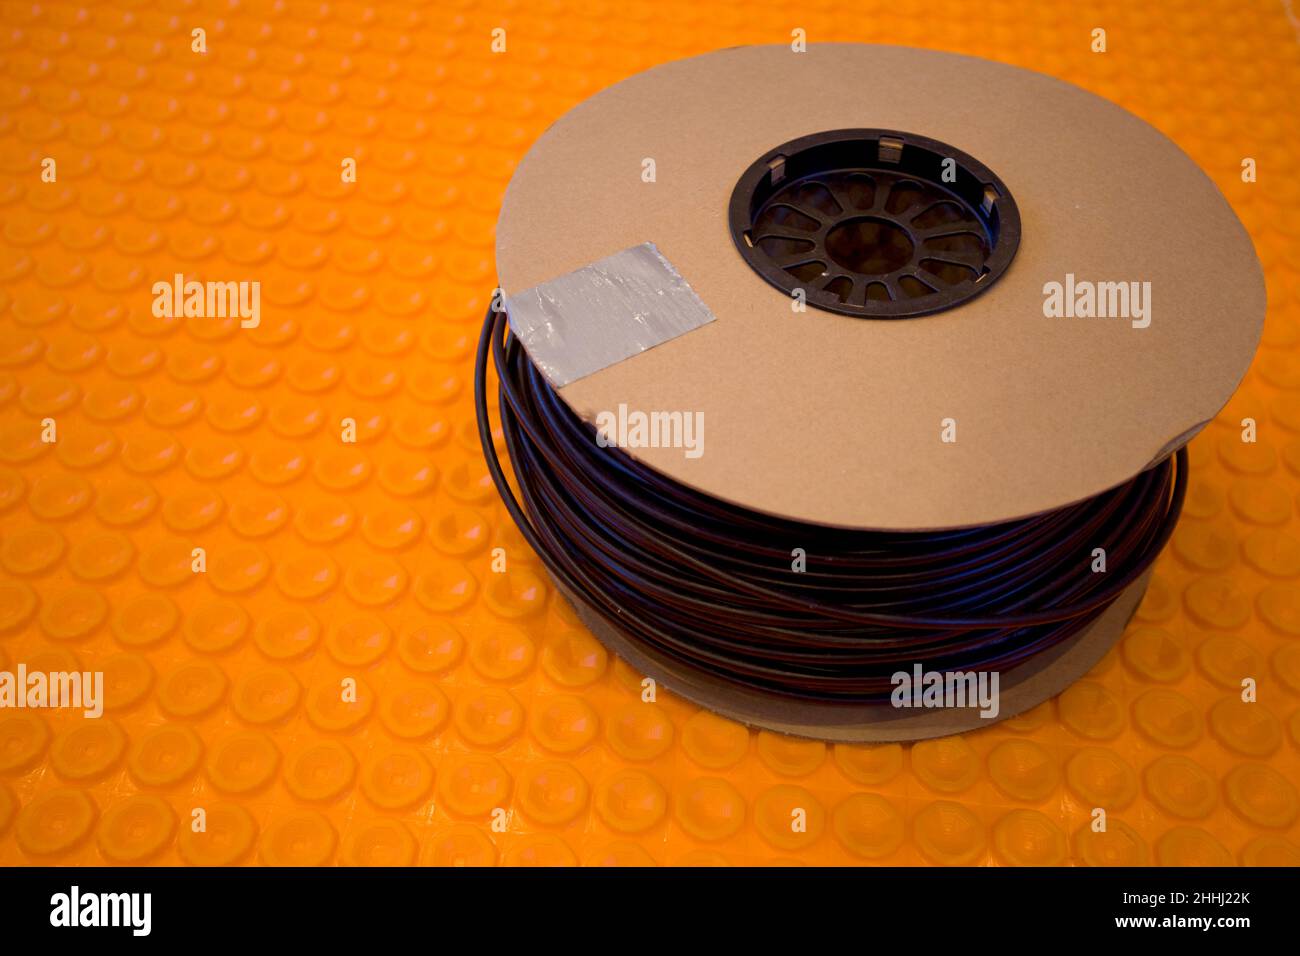 underfloor heating mat and cable Stock Photo